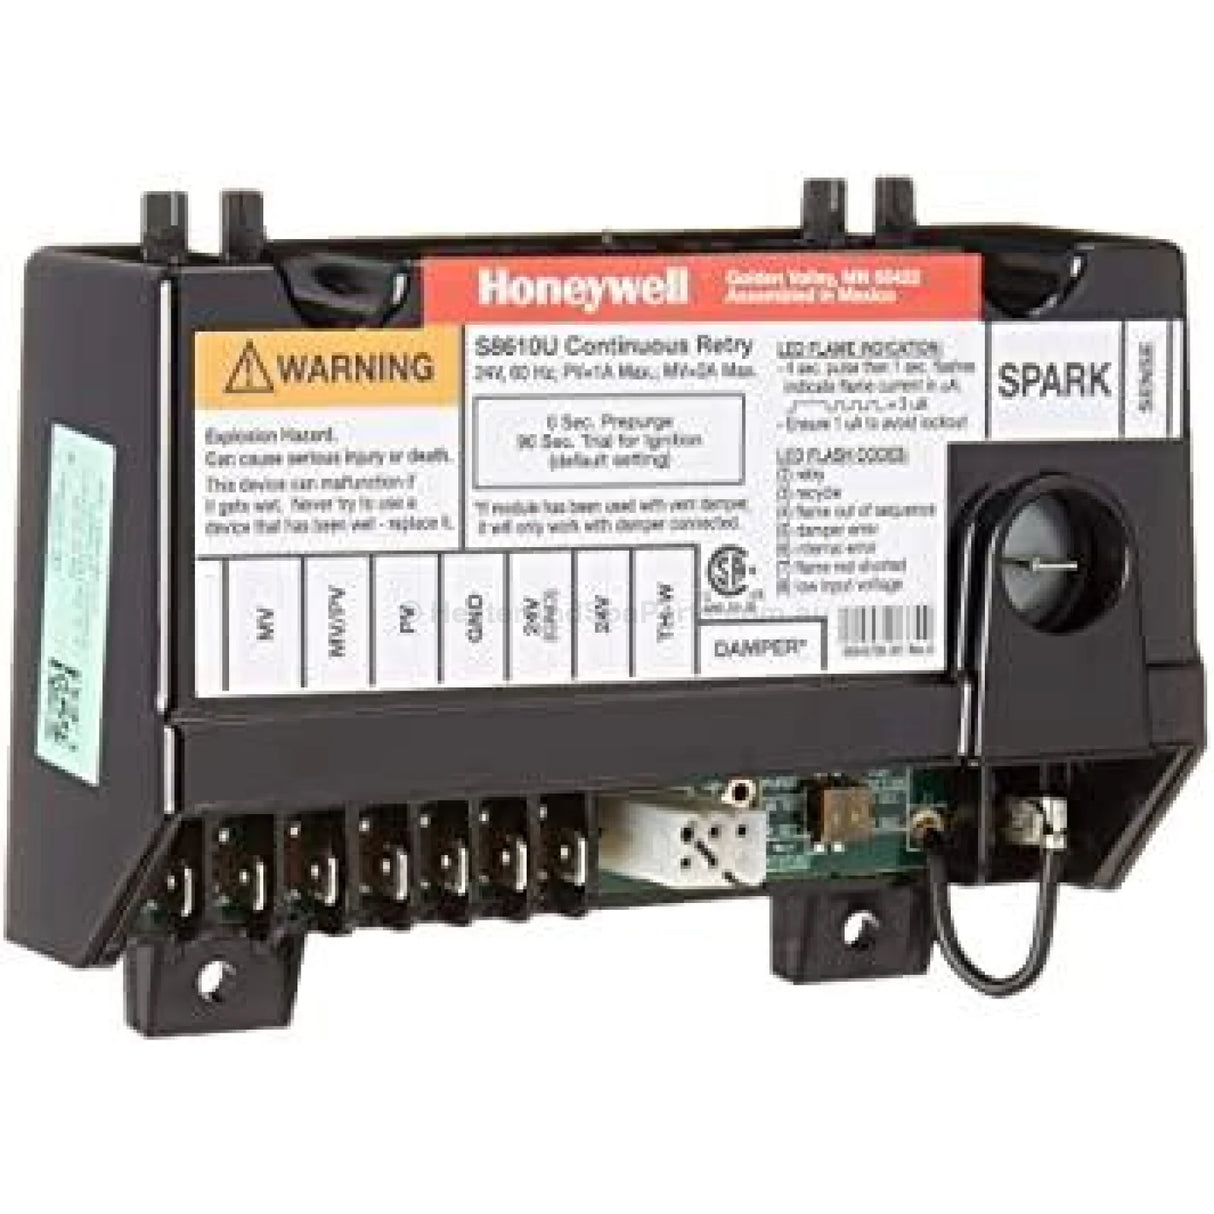 Honeywell S8600H S8610U Ignition Control Module - Jandy Lite, Brivis - Heater and Spa Parts